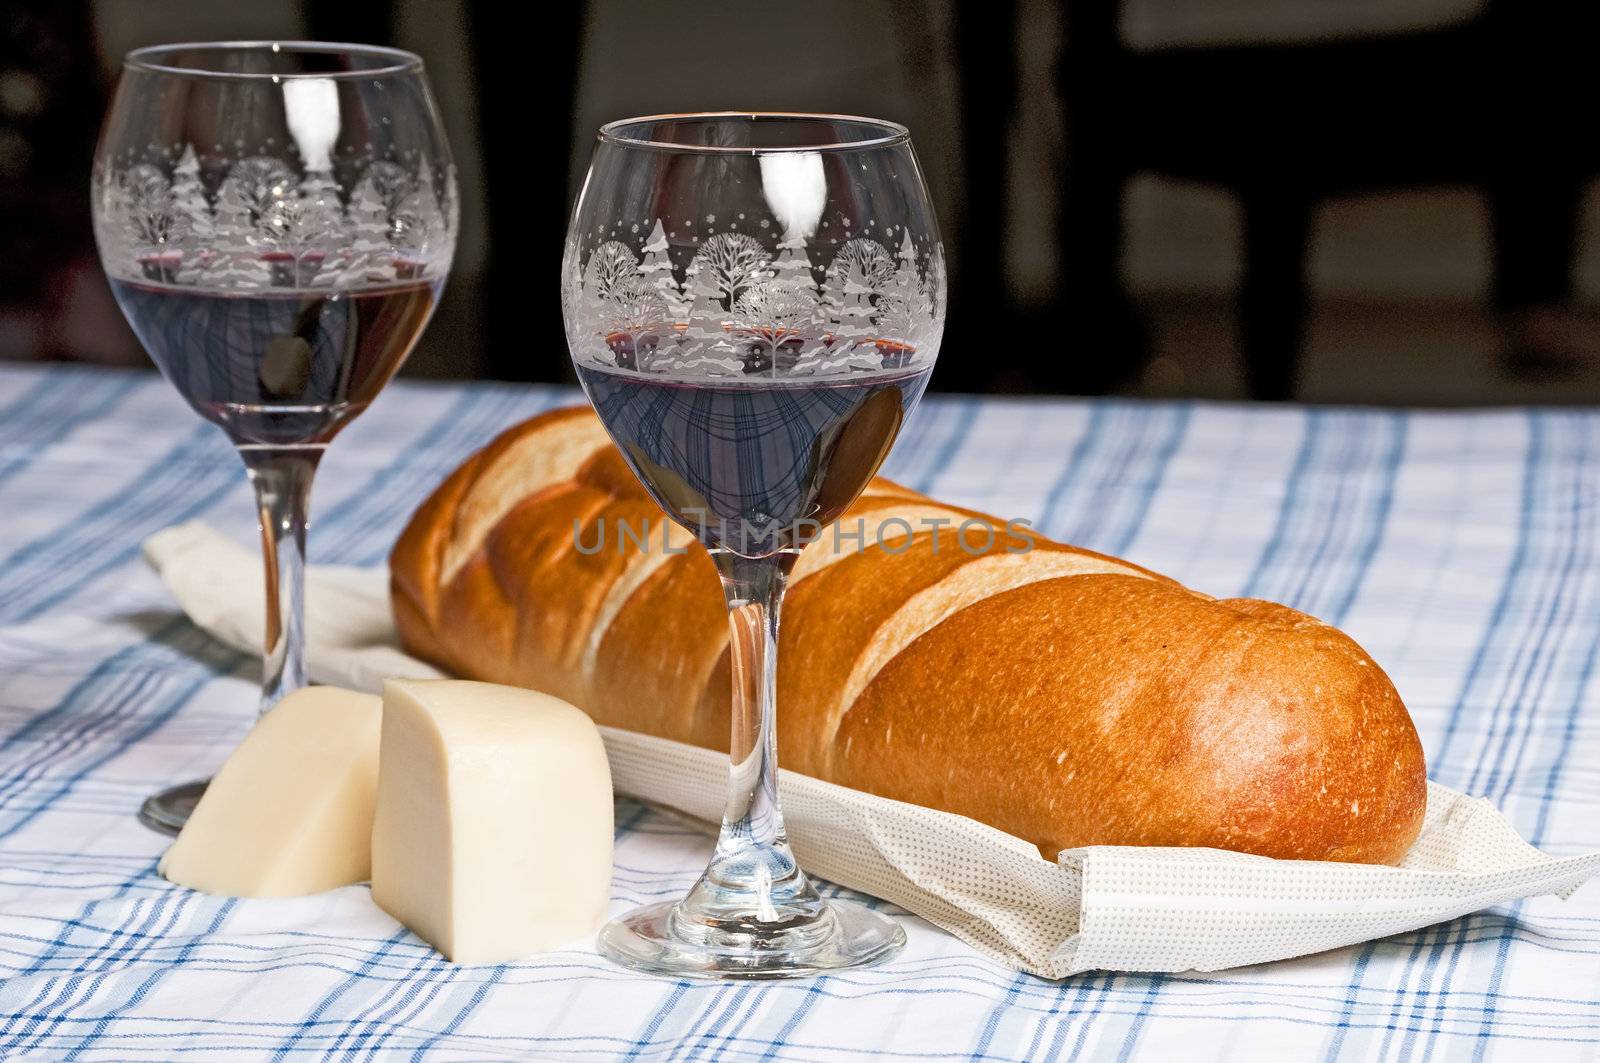 French bread, cheese and wine in Christmas glasses to celebrate the season.